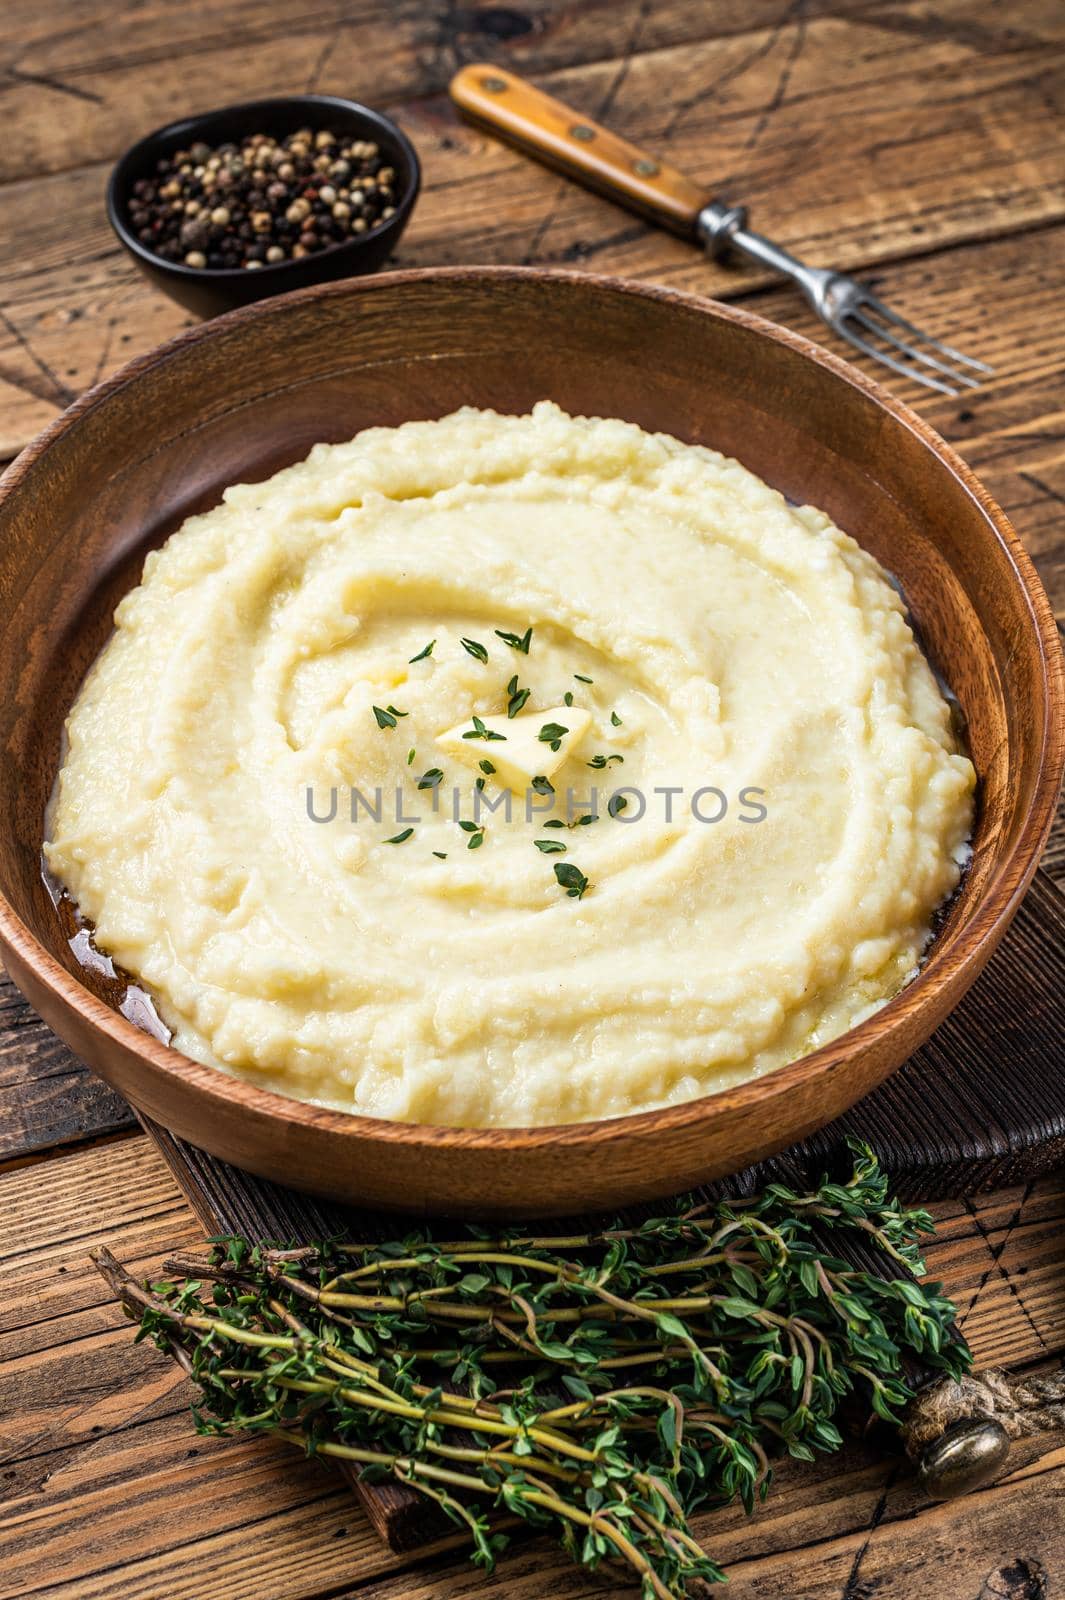 Mashed potatoes, boiled puree in a wooden plate. Wooden background. Top view by Composter